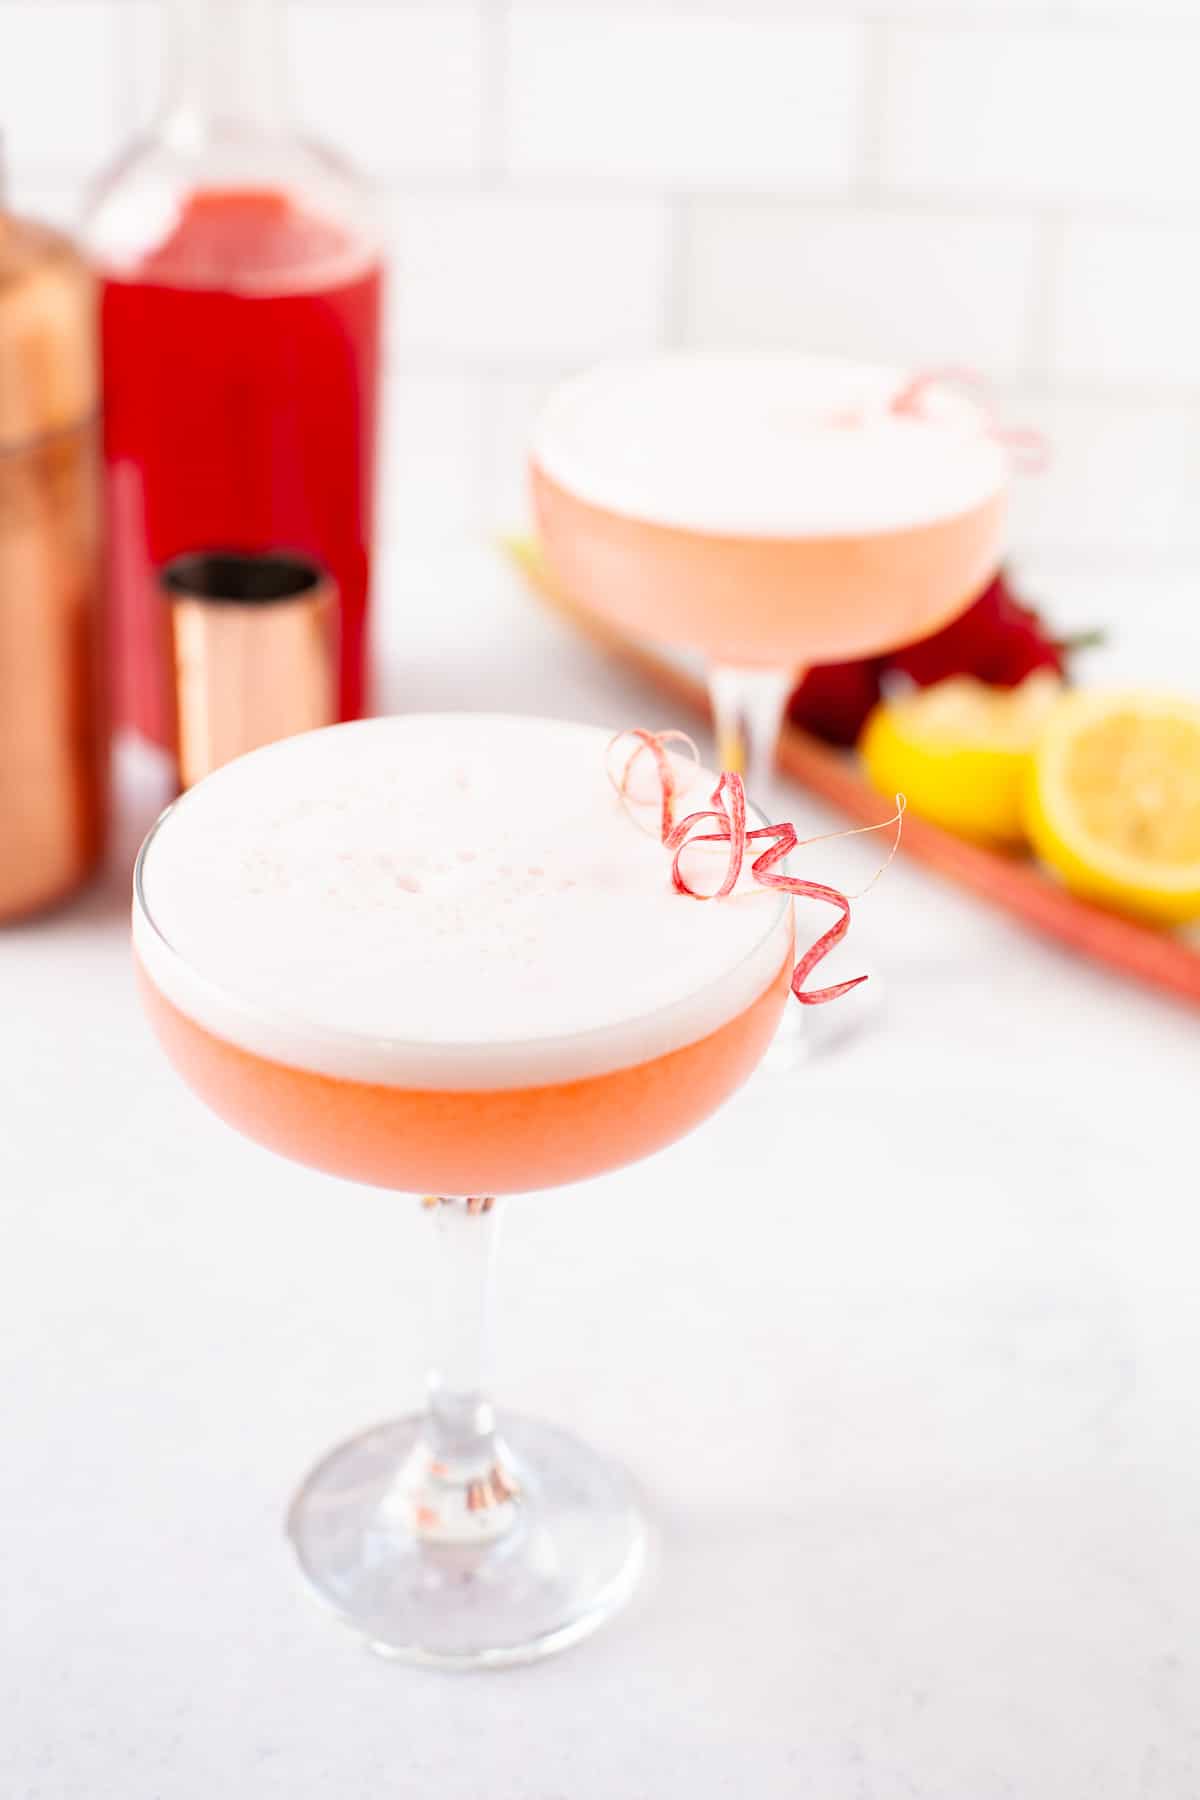 two strawberry rhubarb cocktails in coupe glasses with rhubarb peel garnishes, lemons and syrup in background